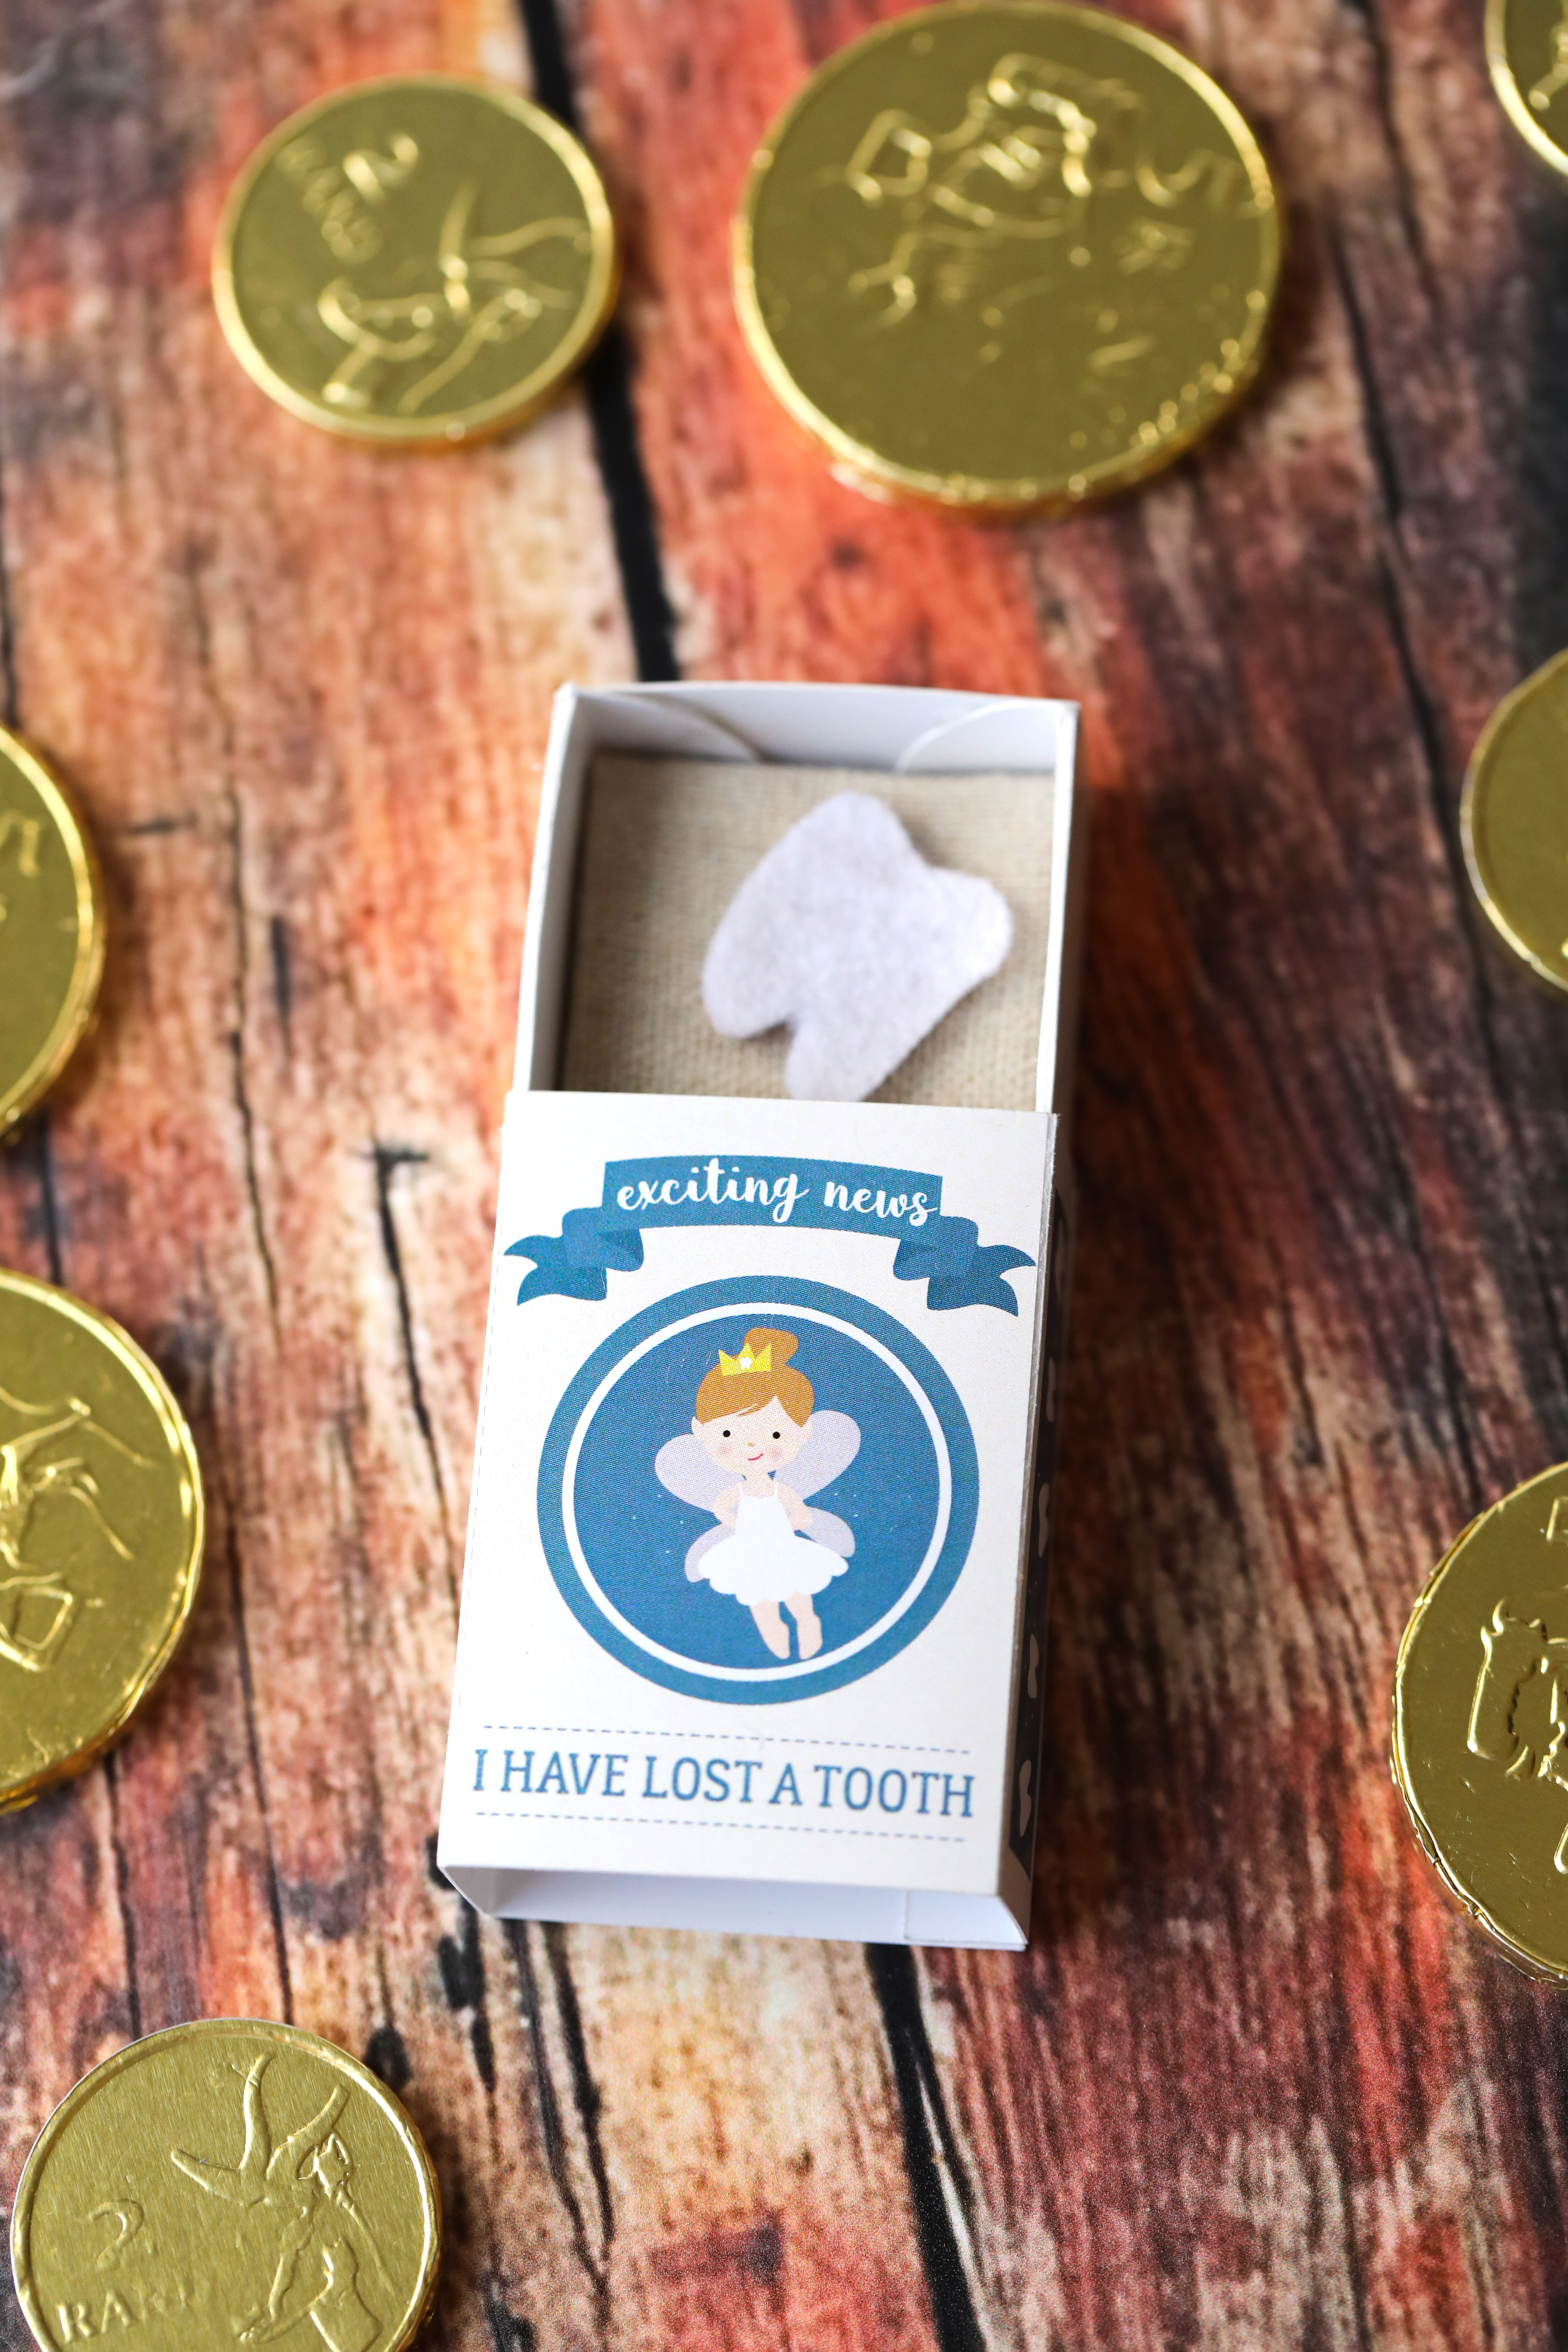 Free Toothfairy matchbox printable in pink and blue!